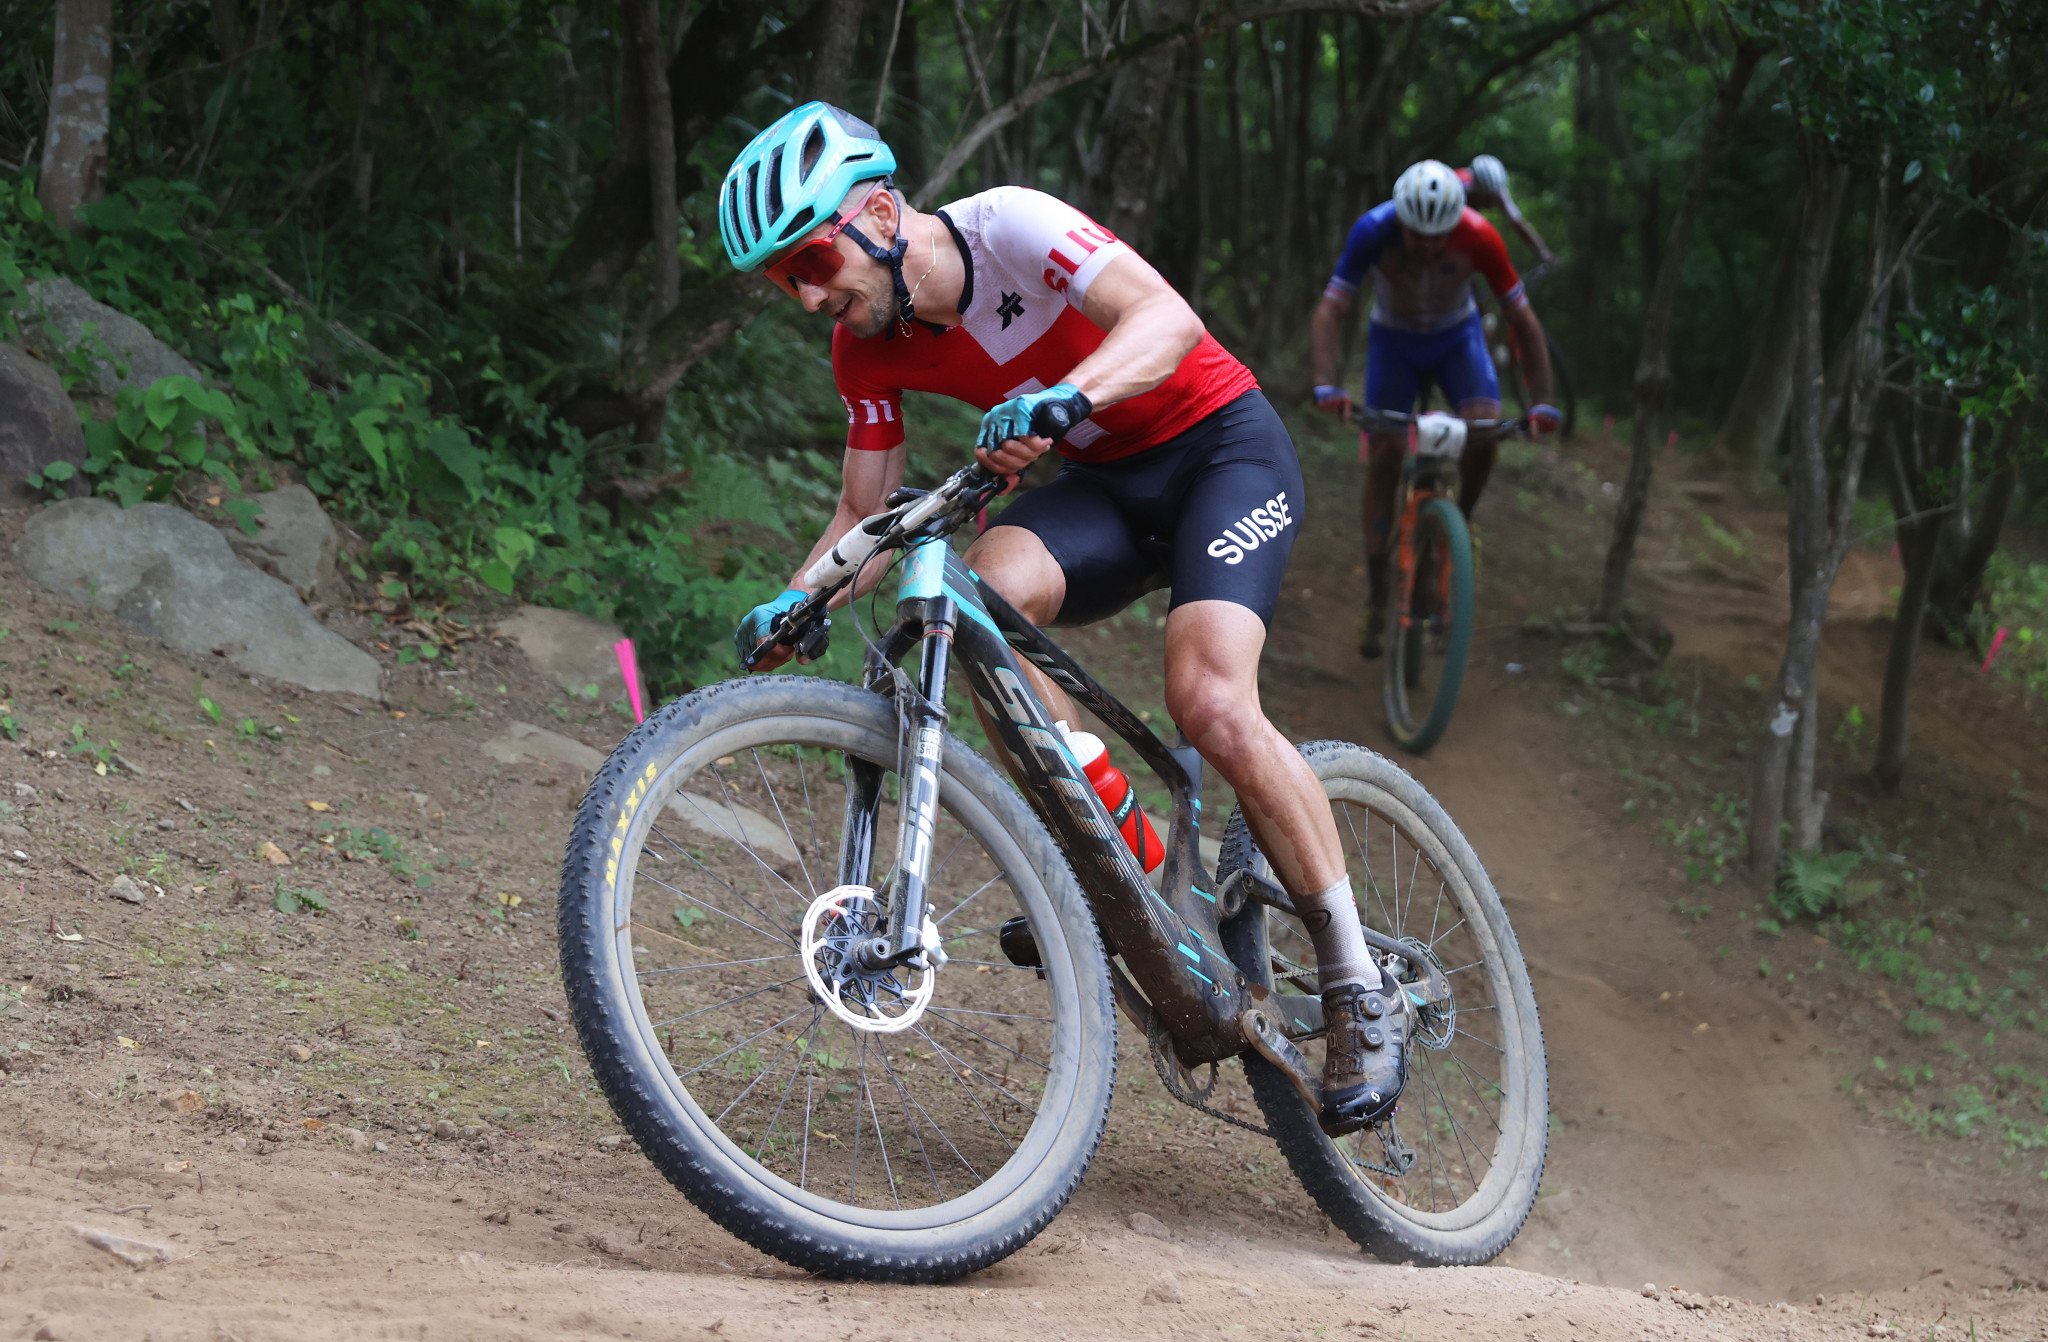 UCI Mountain Bike World Cup visits Snowshoe with world champions in tow